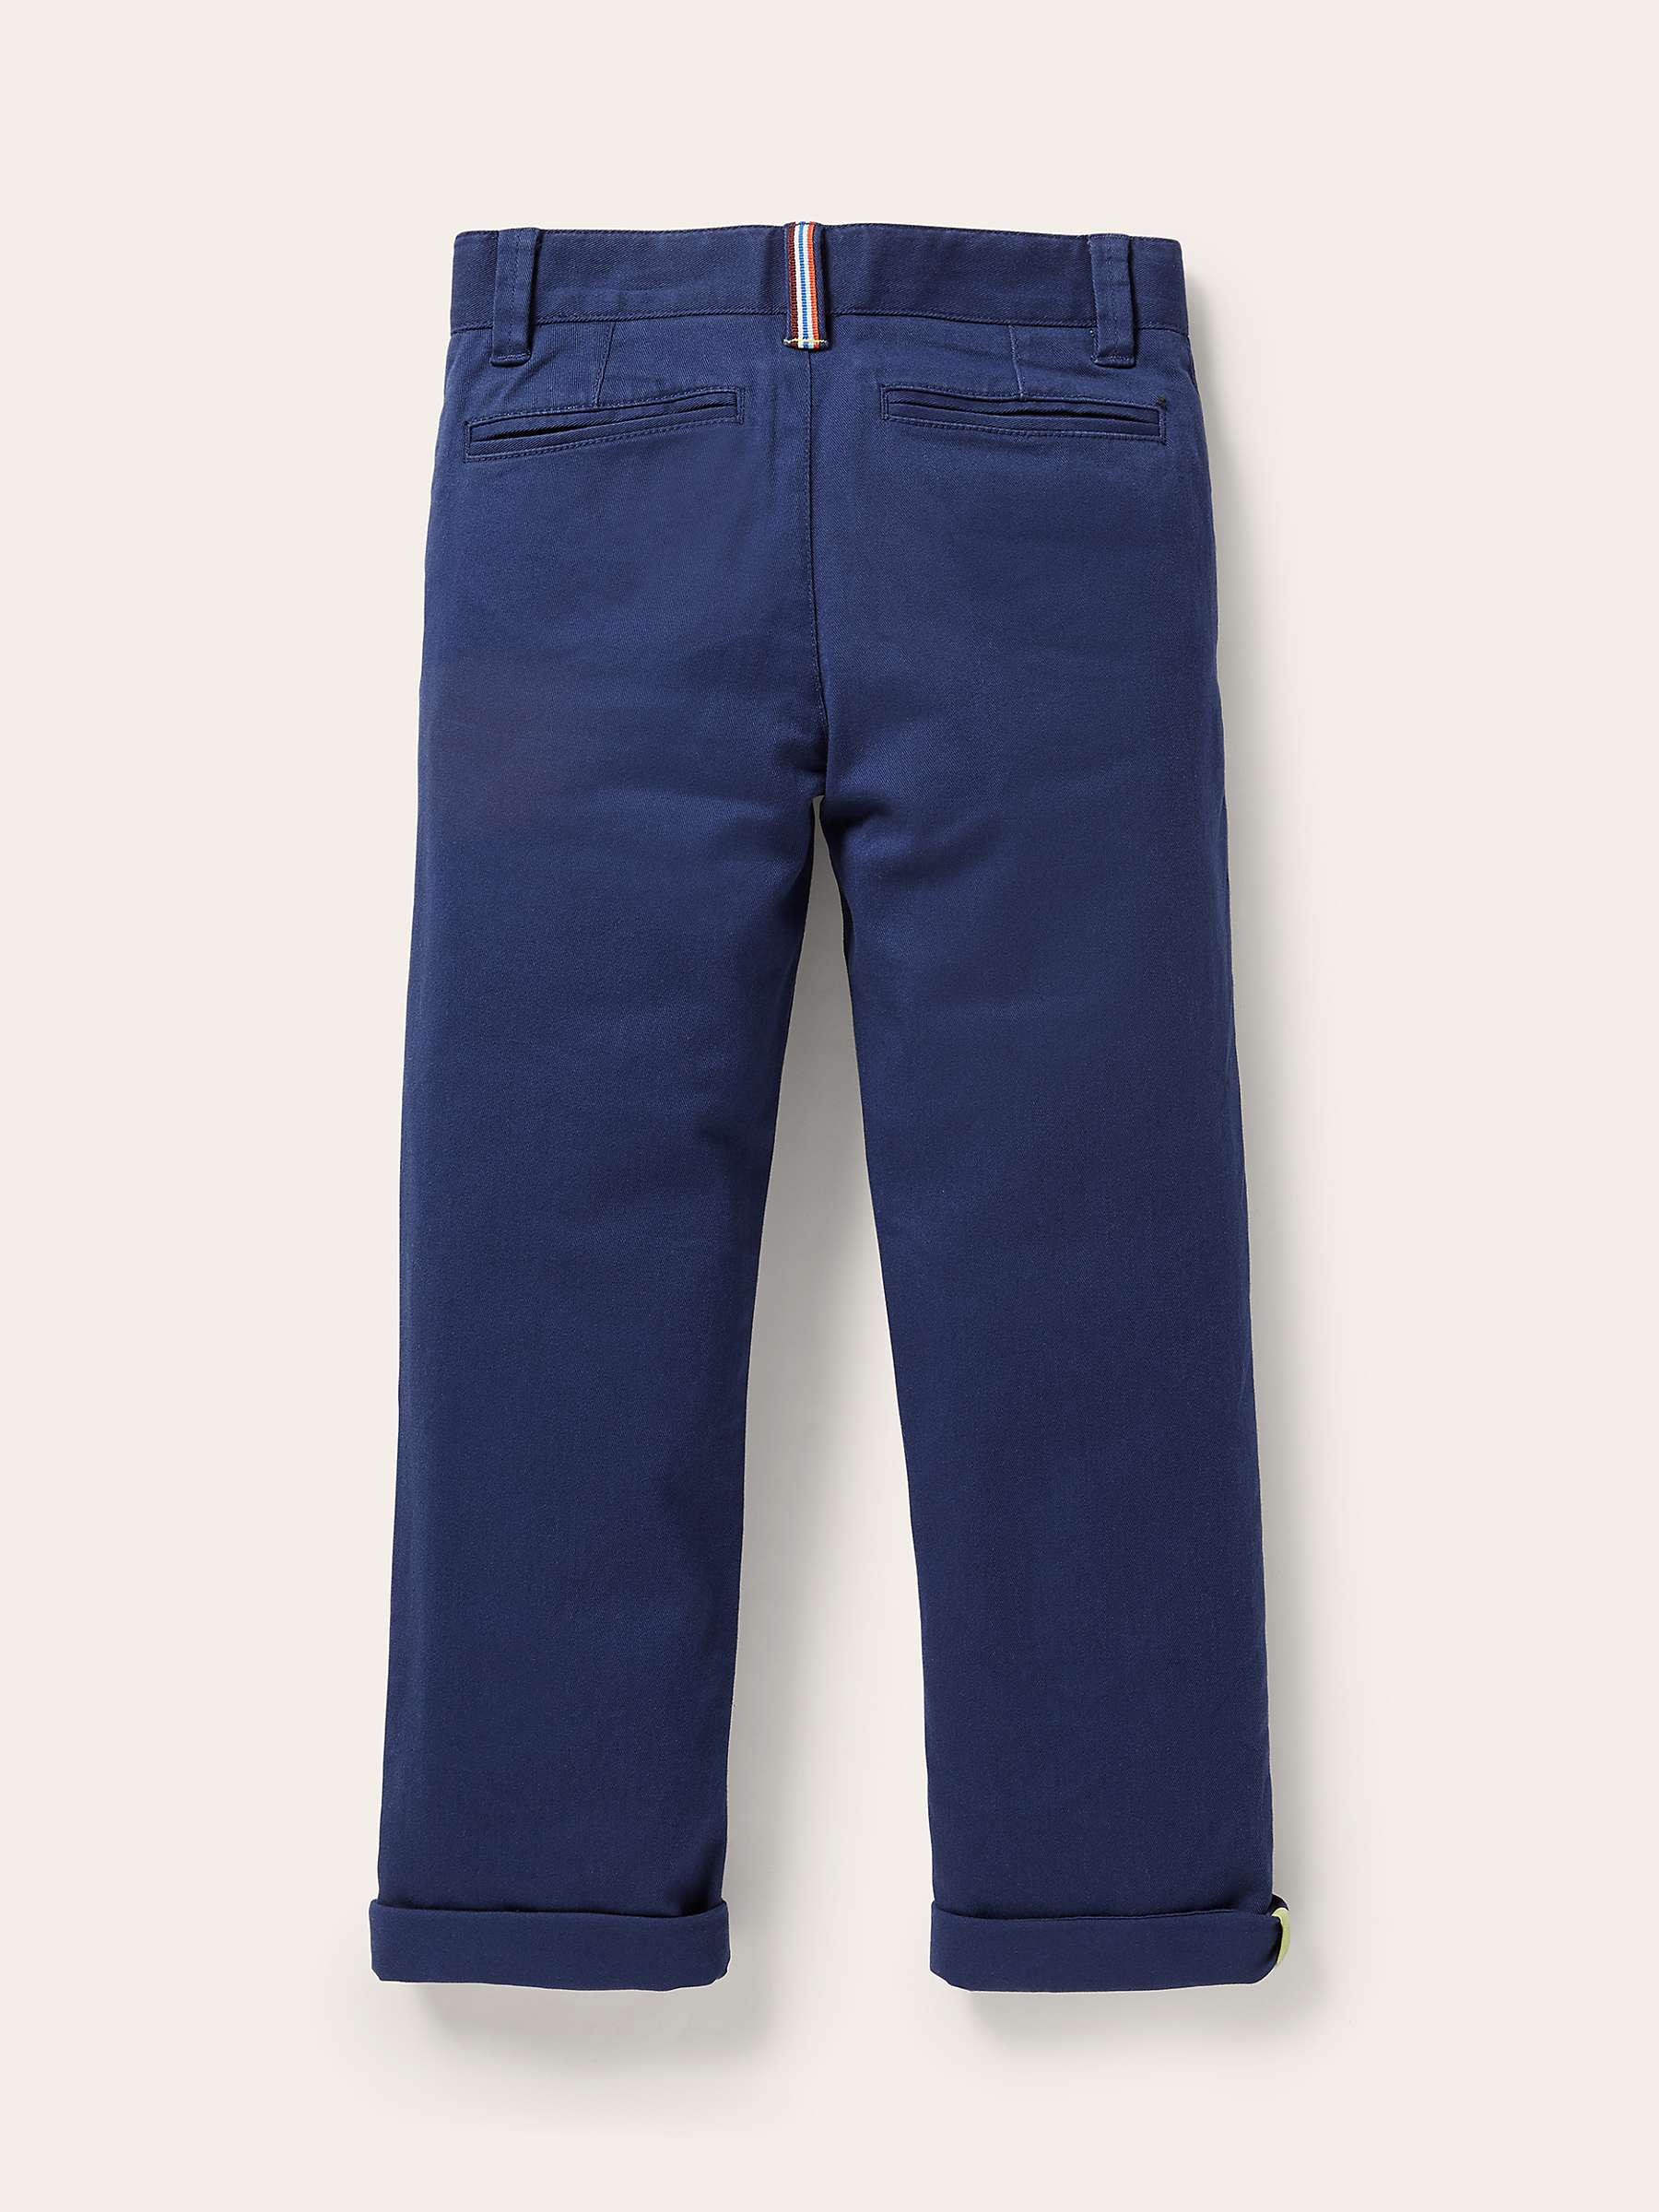 Buy Mini Boden Kids' Chino Stretch Trousers Online at johnlewis.com